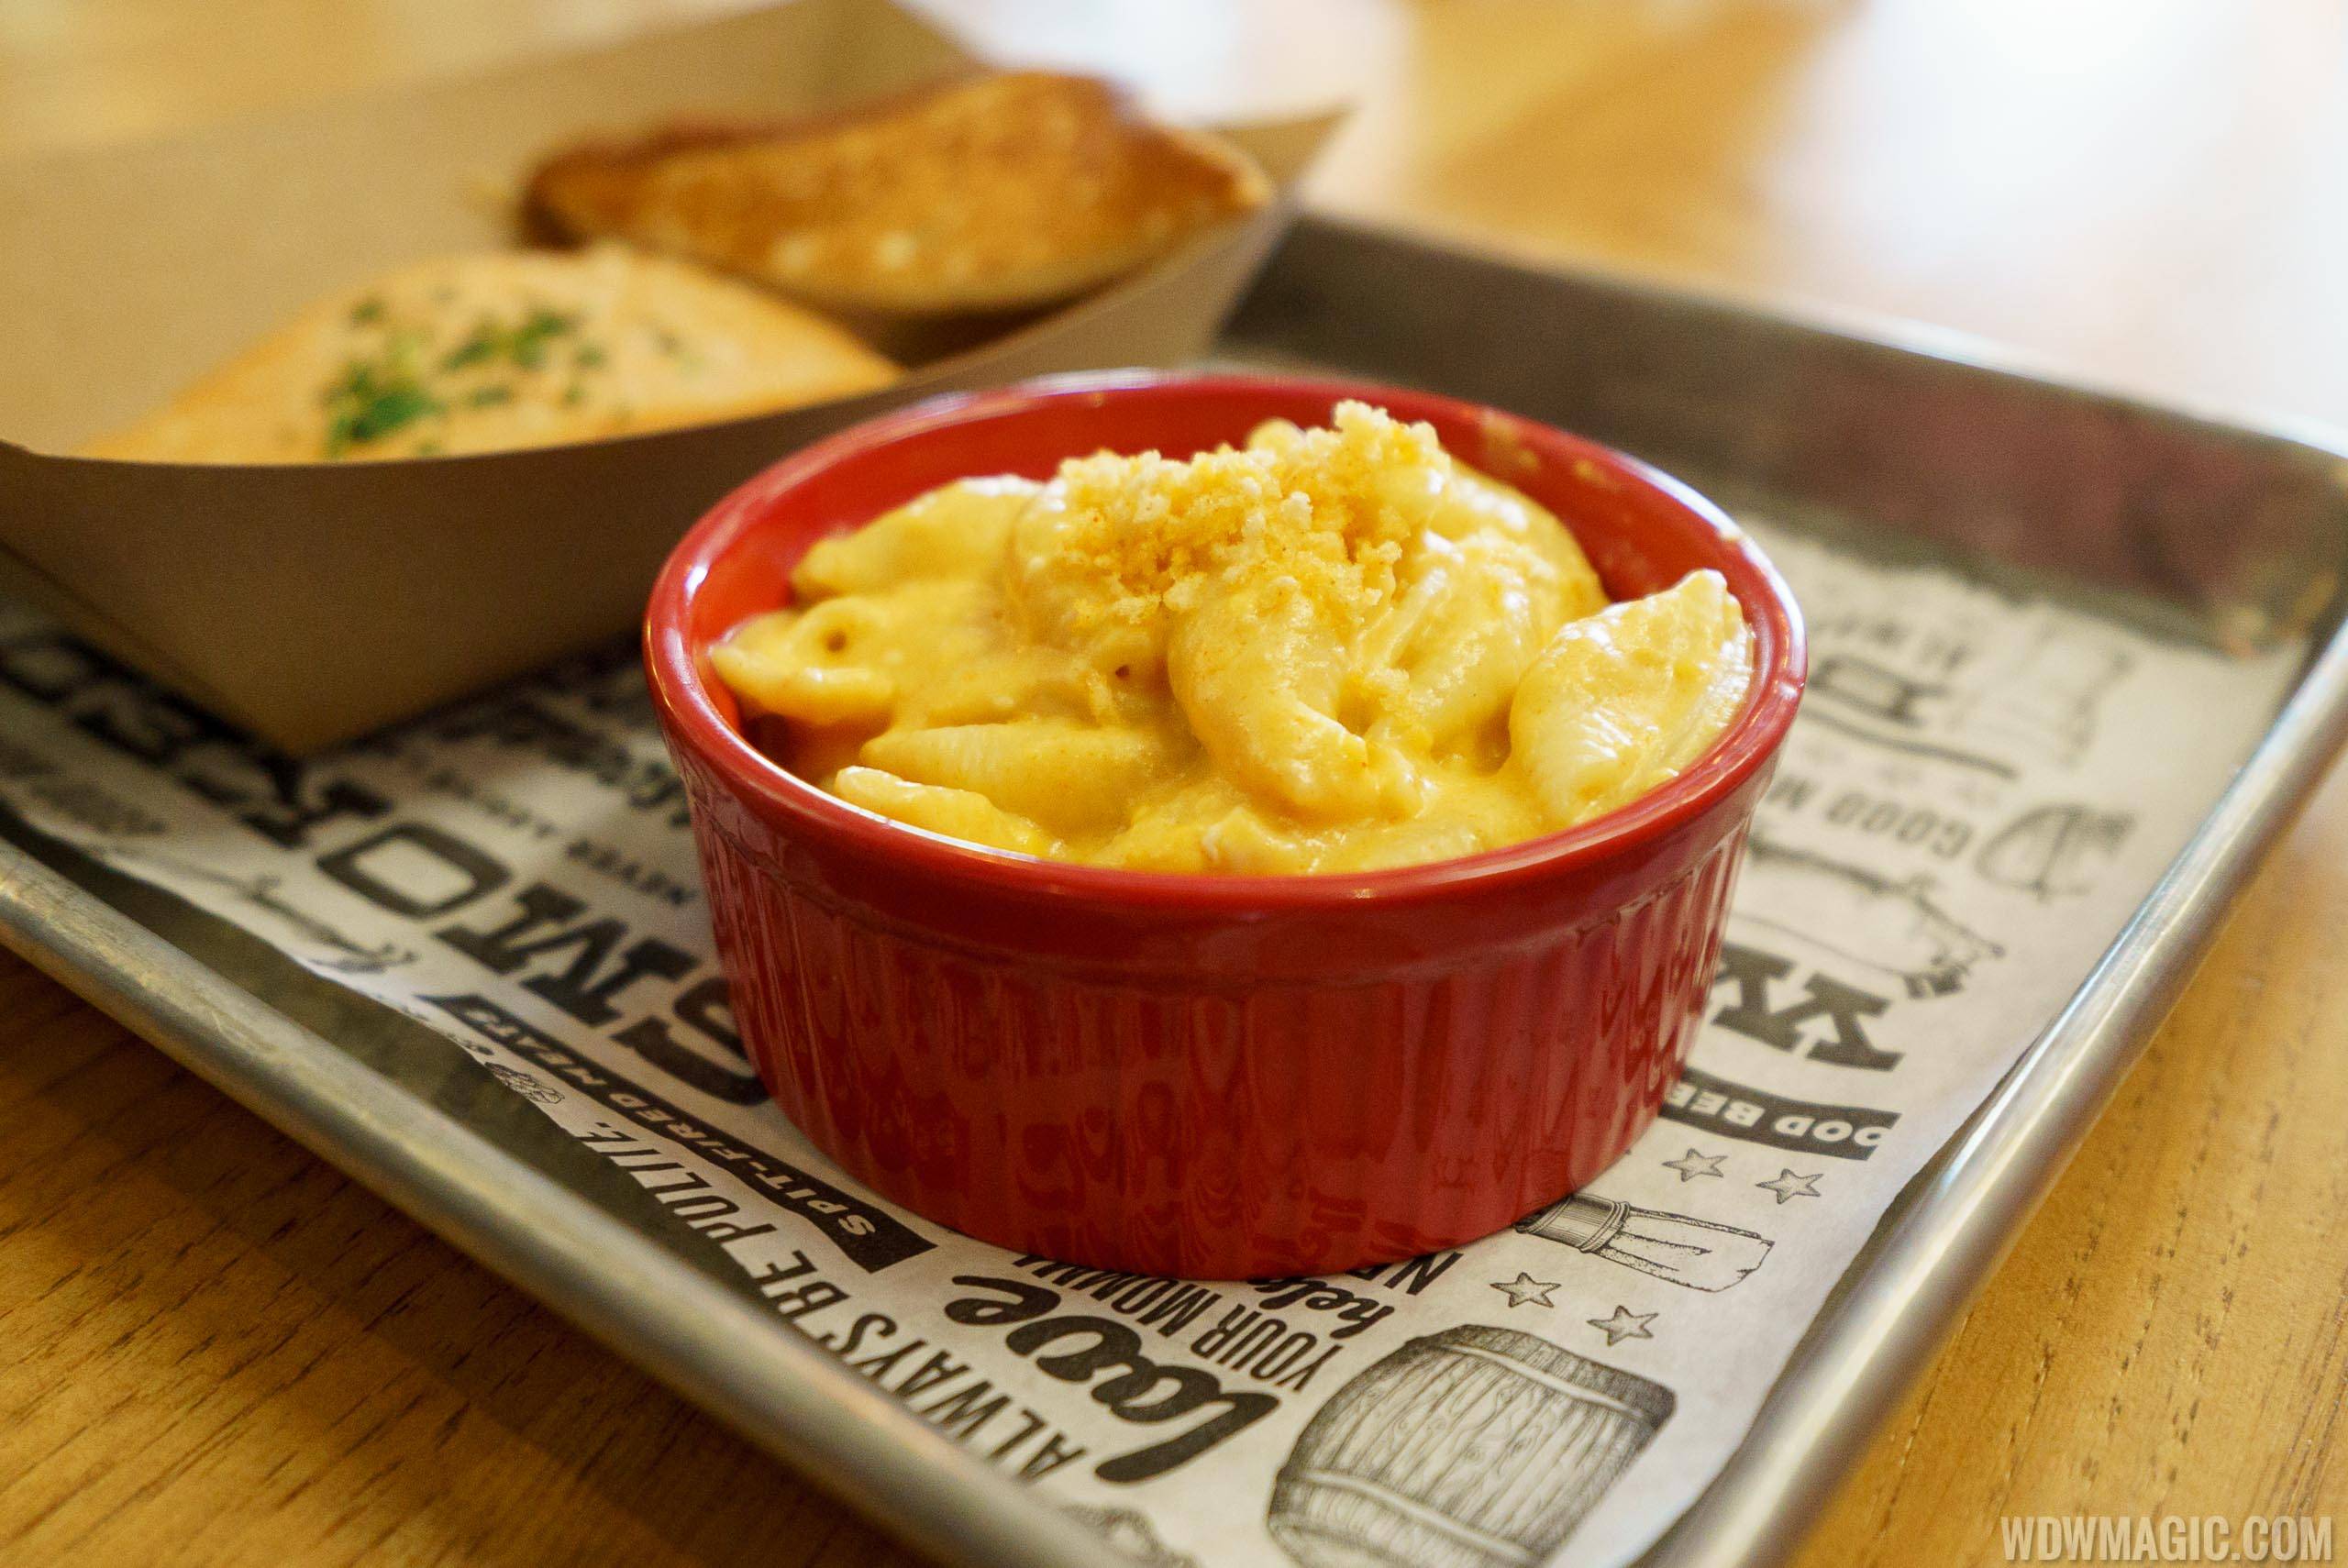 The Polite Pig - Mac and Cheese